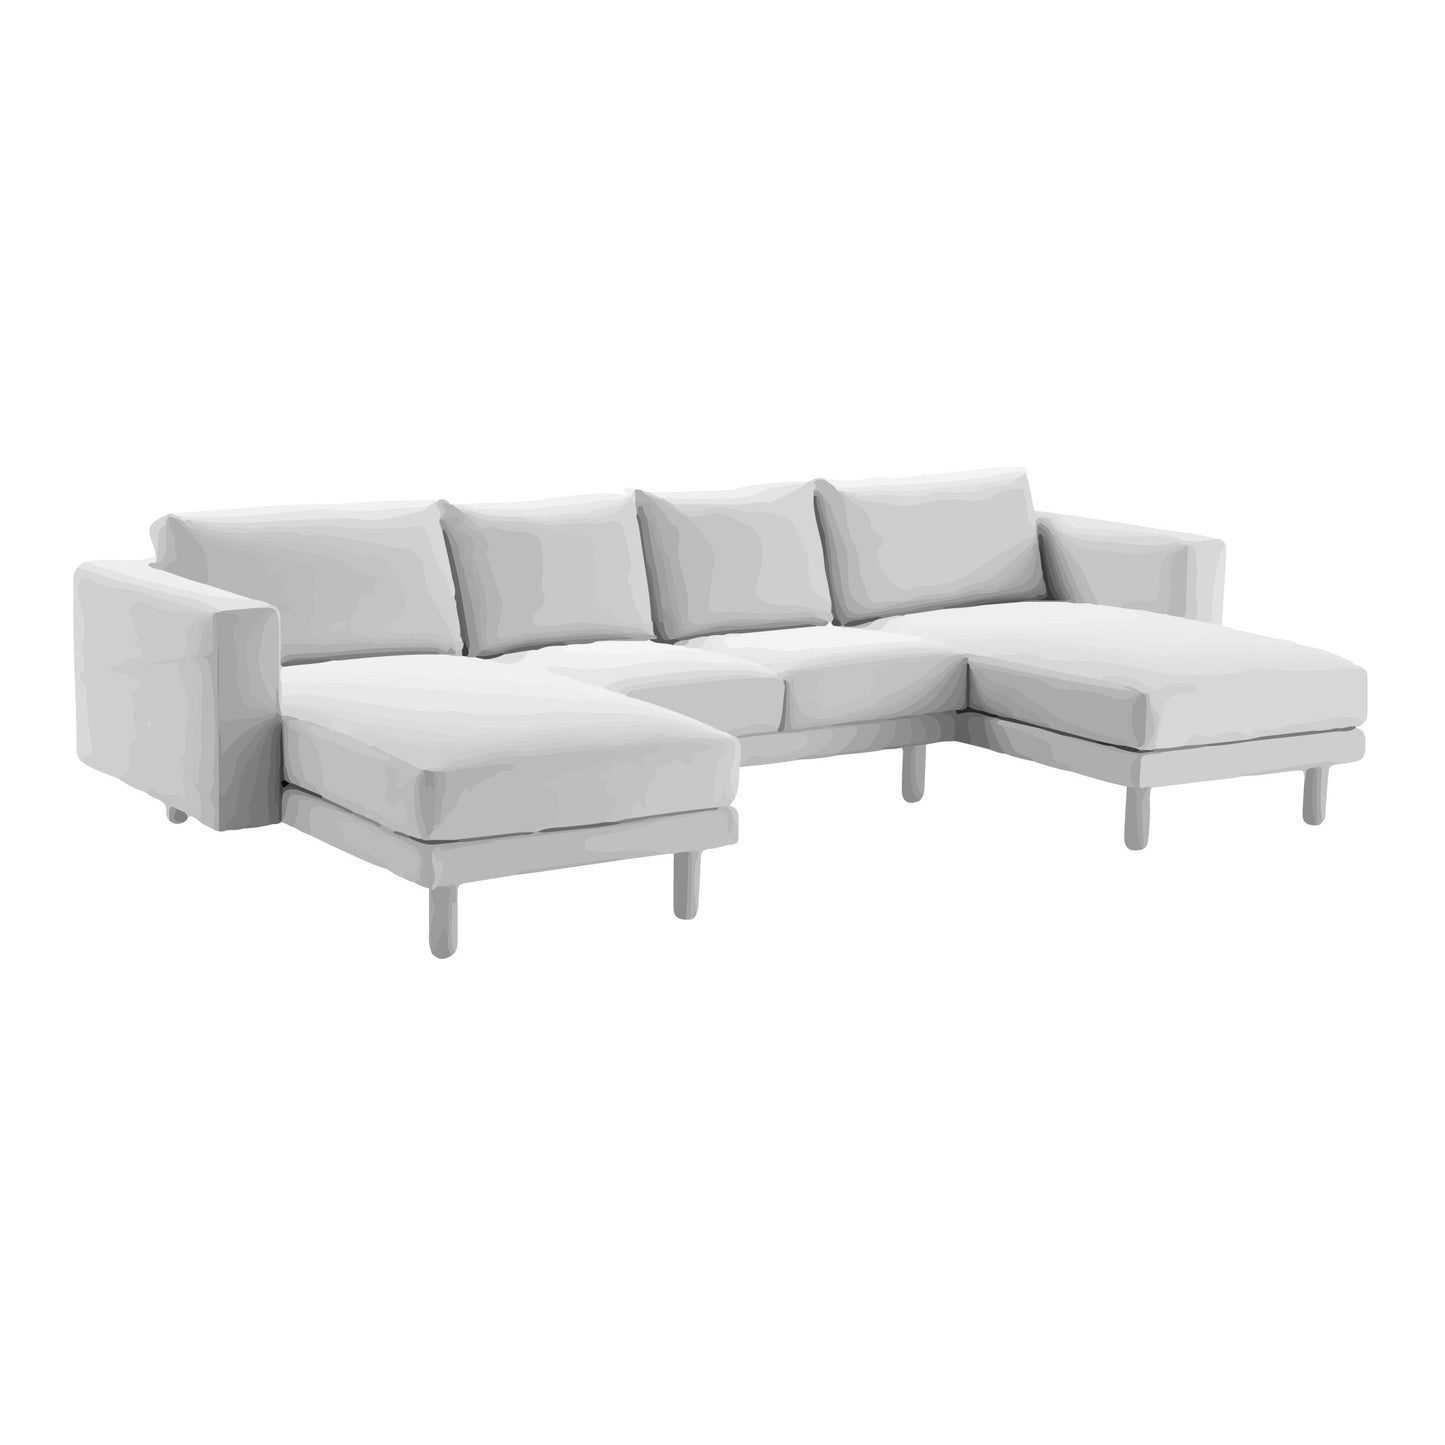 Norsborg 4 Seater Sofa Cover with 2 x Chaise